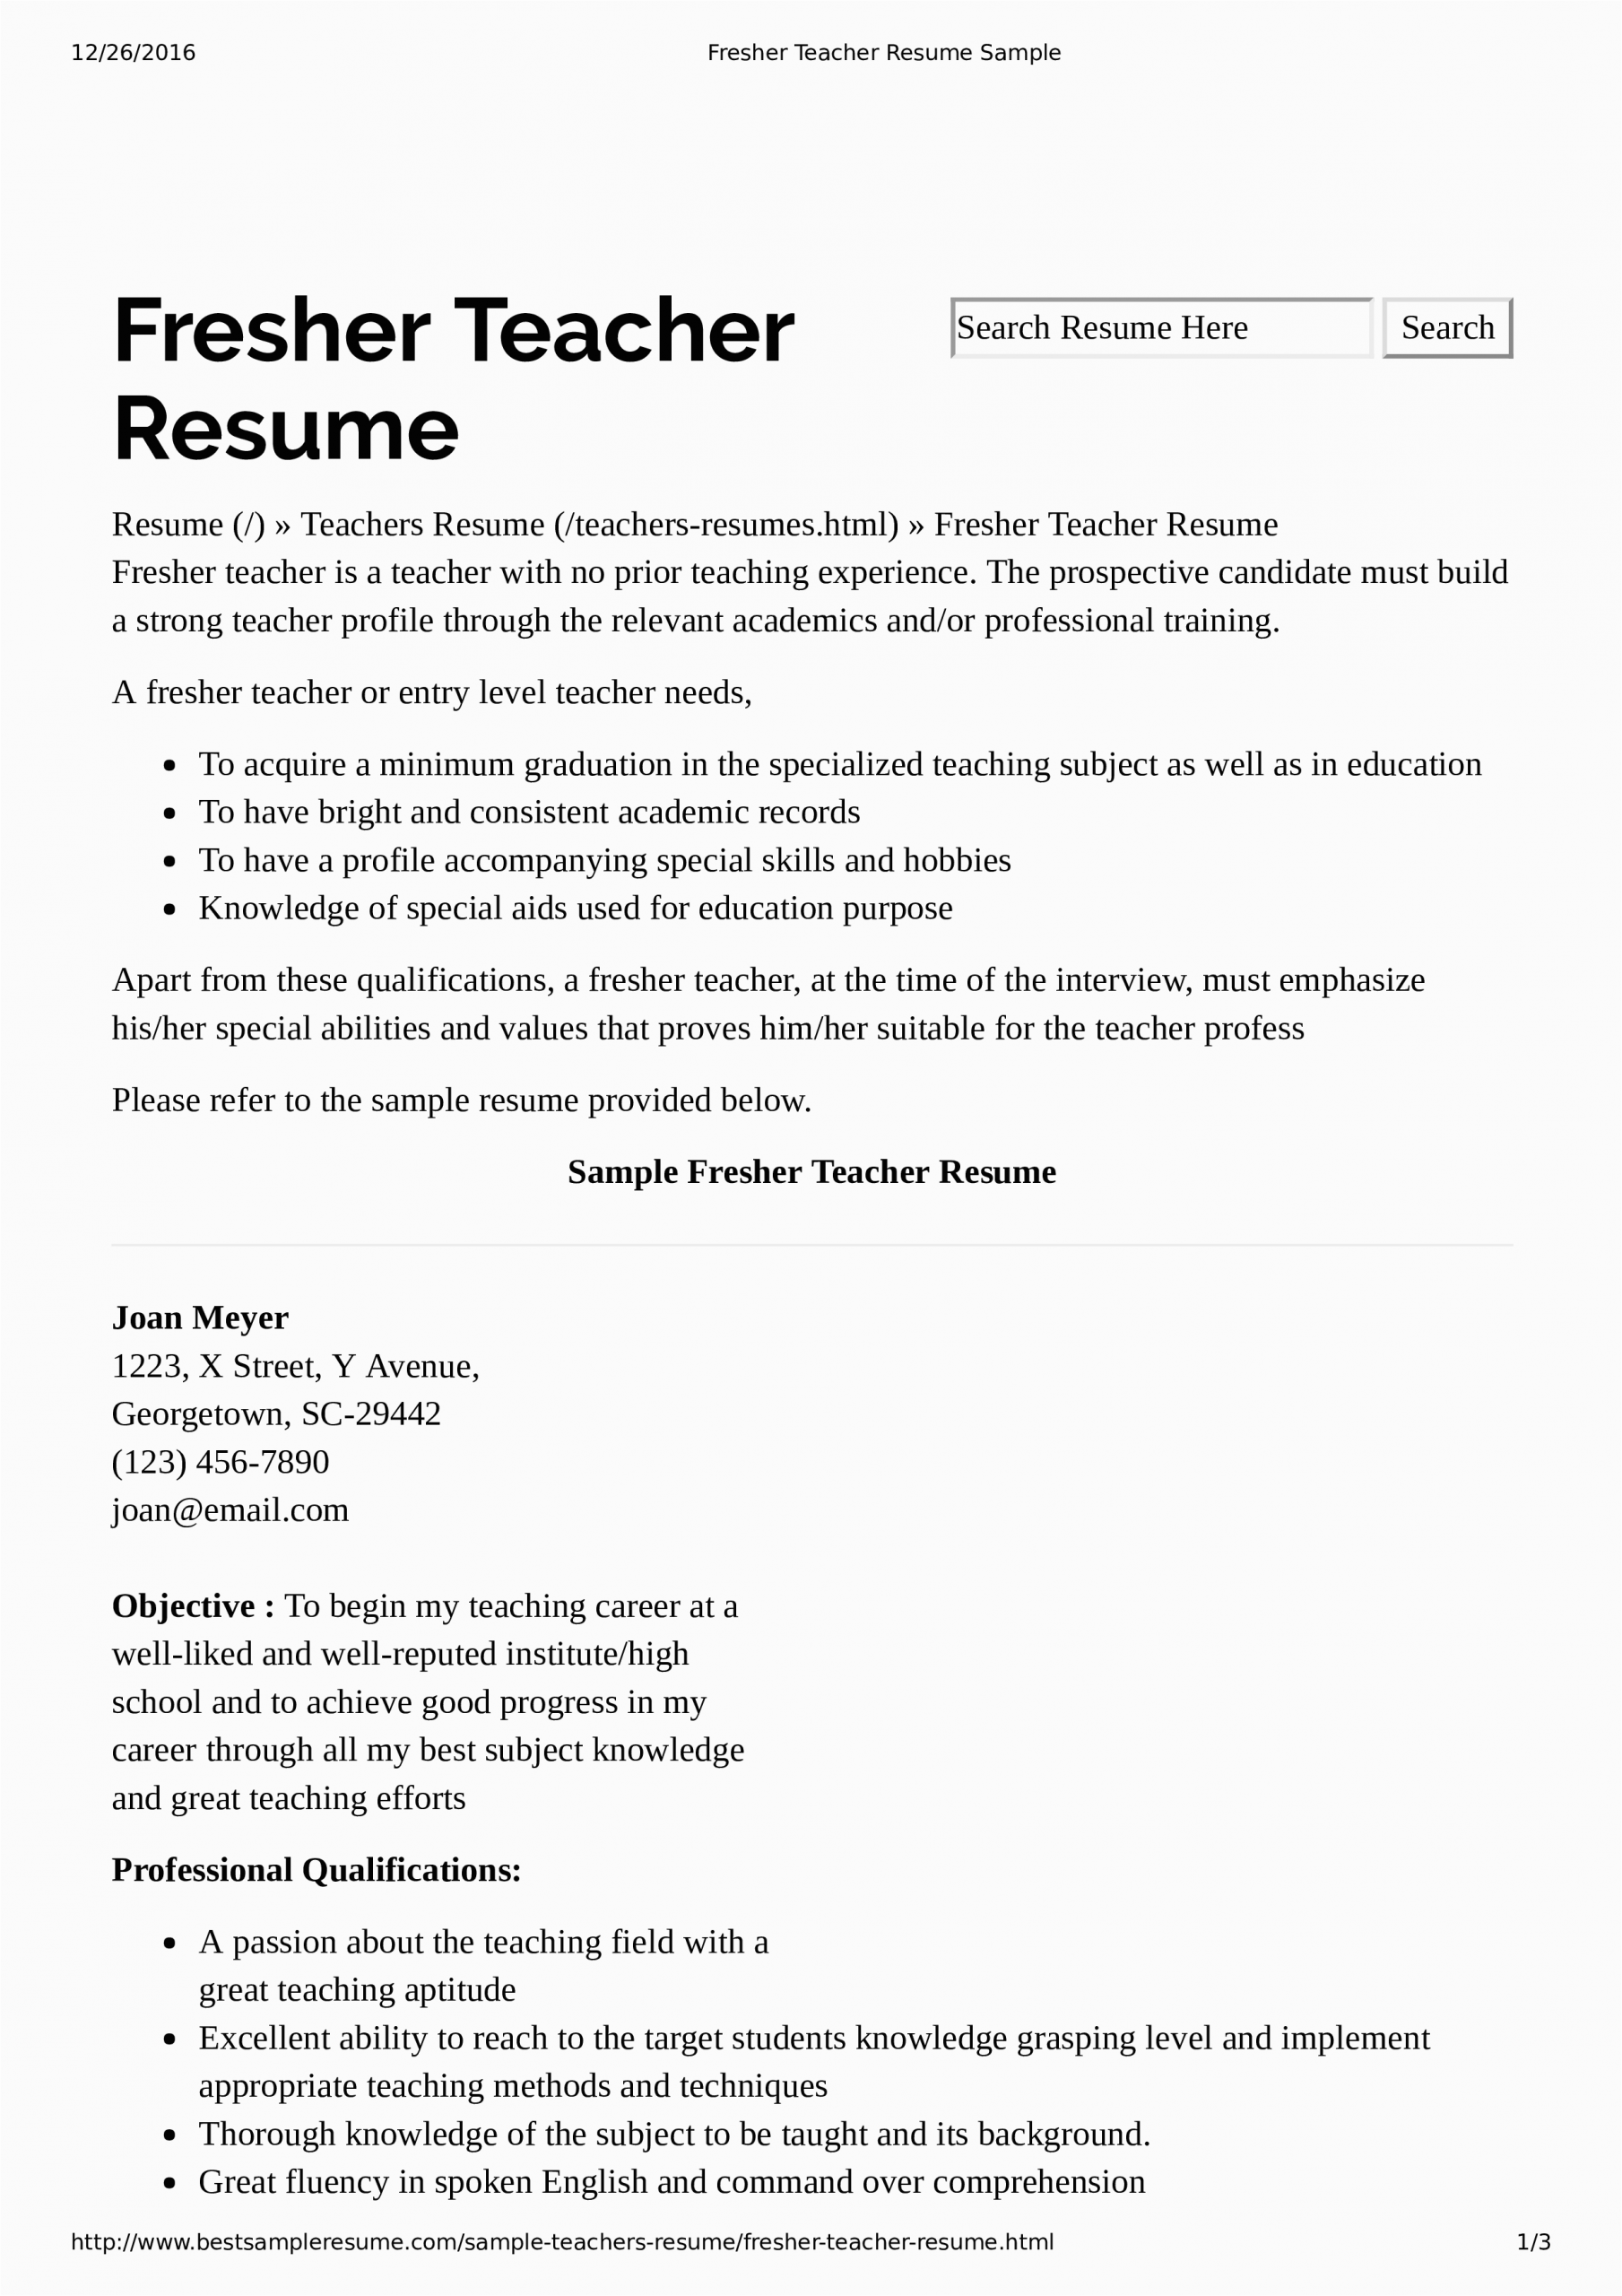 Sample Resume for Teaching Job with Experience Preschool Teacher Resume without Experience